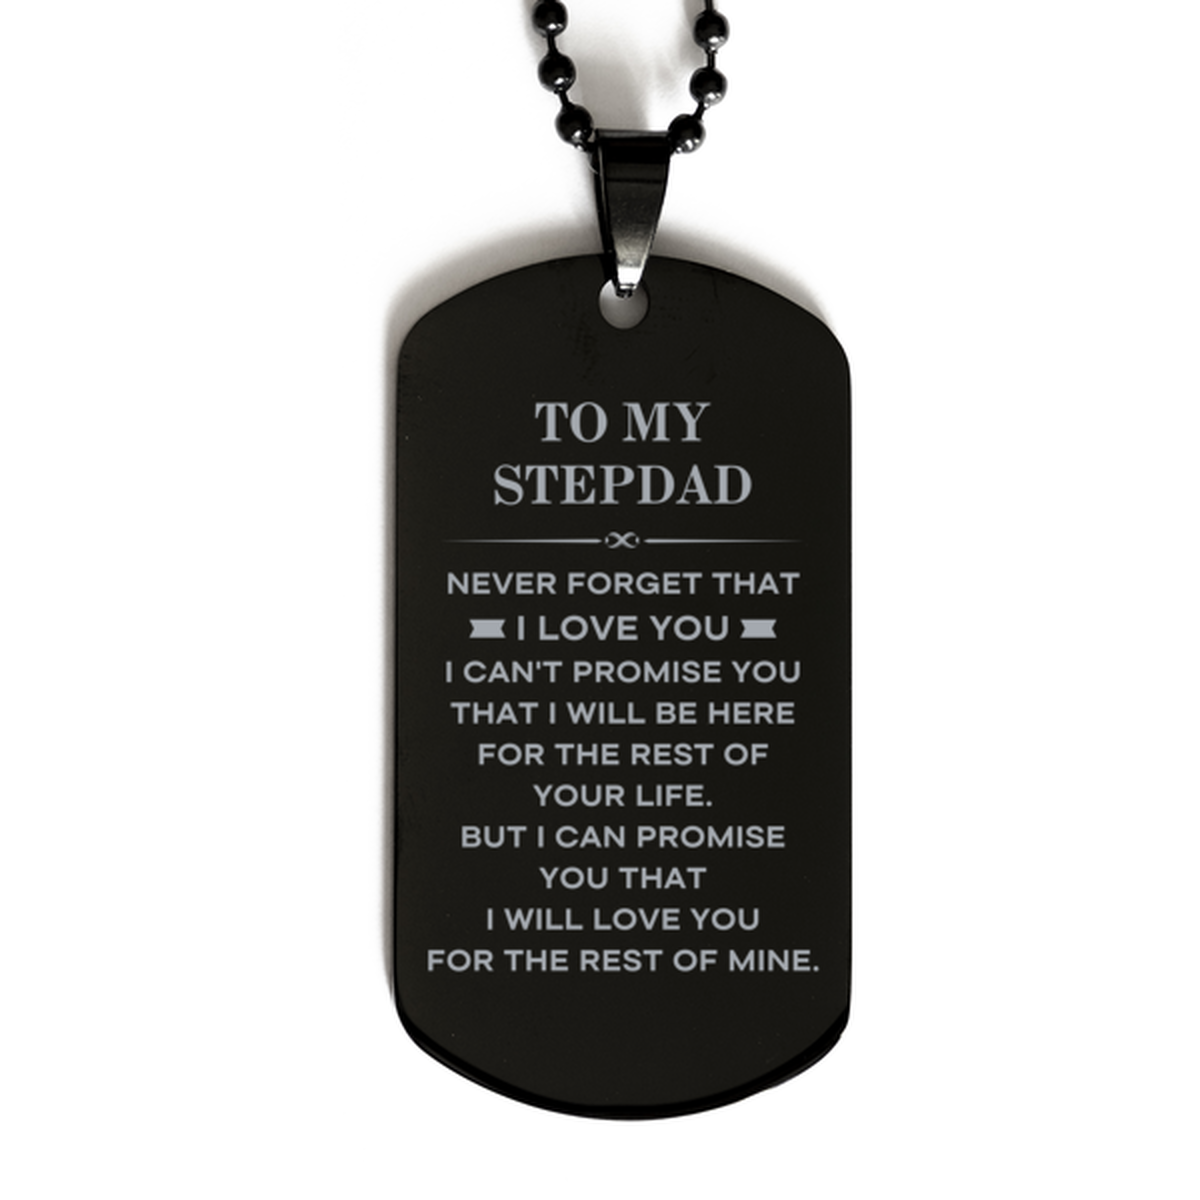 To My Stepdad Gifts, I will love you for the rest of mine, Love Stepdad Dog Tag Necklace, Birthday Christmas Unique Black Dog Tag For Stepdad